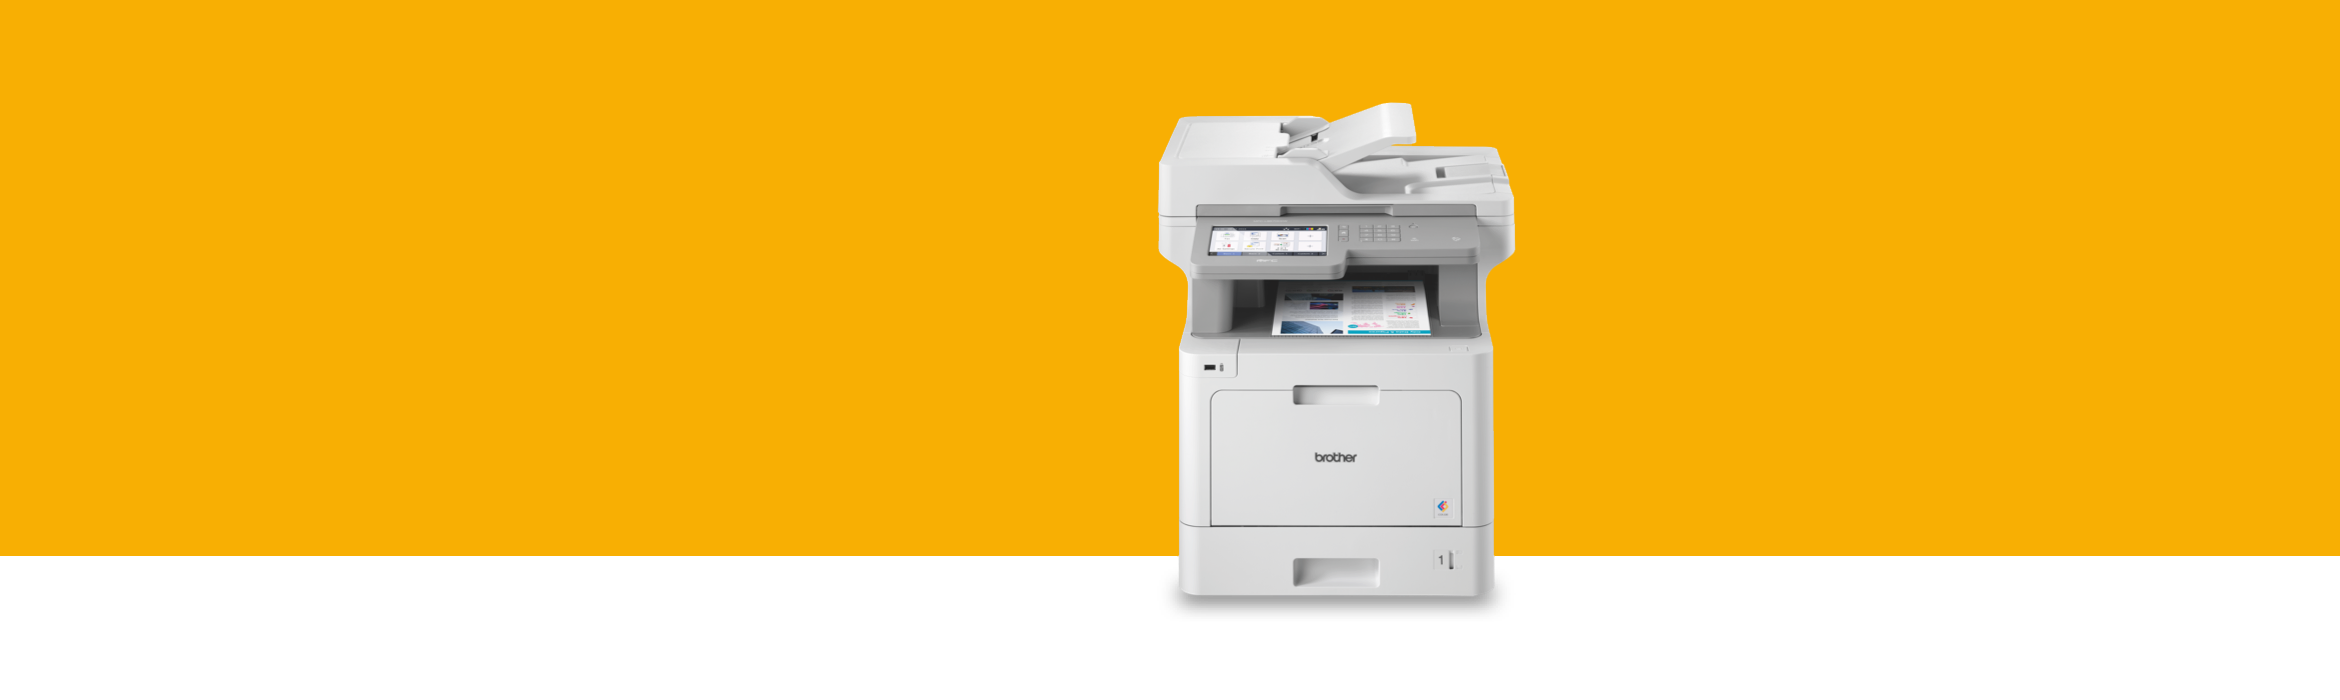 Managed Print Services Printers | MPS | Brother UK